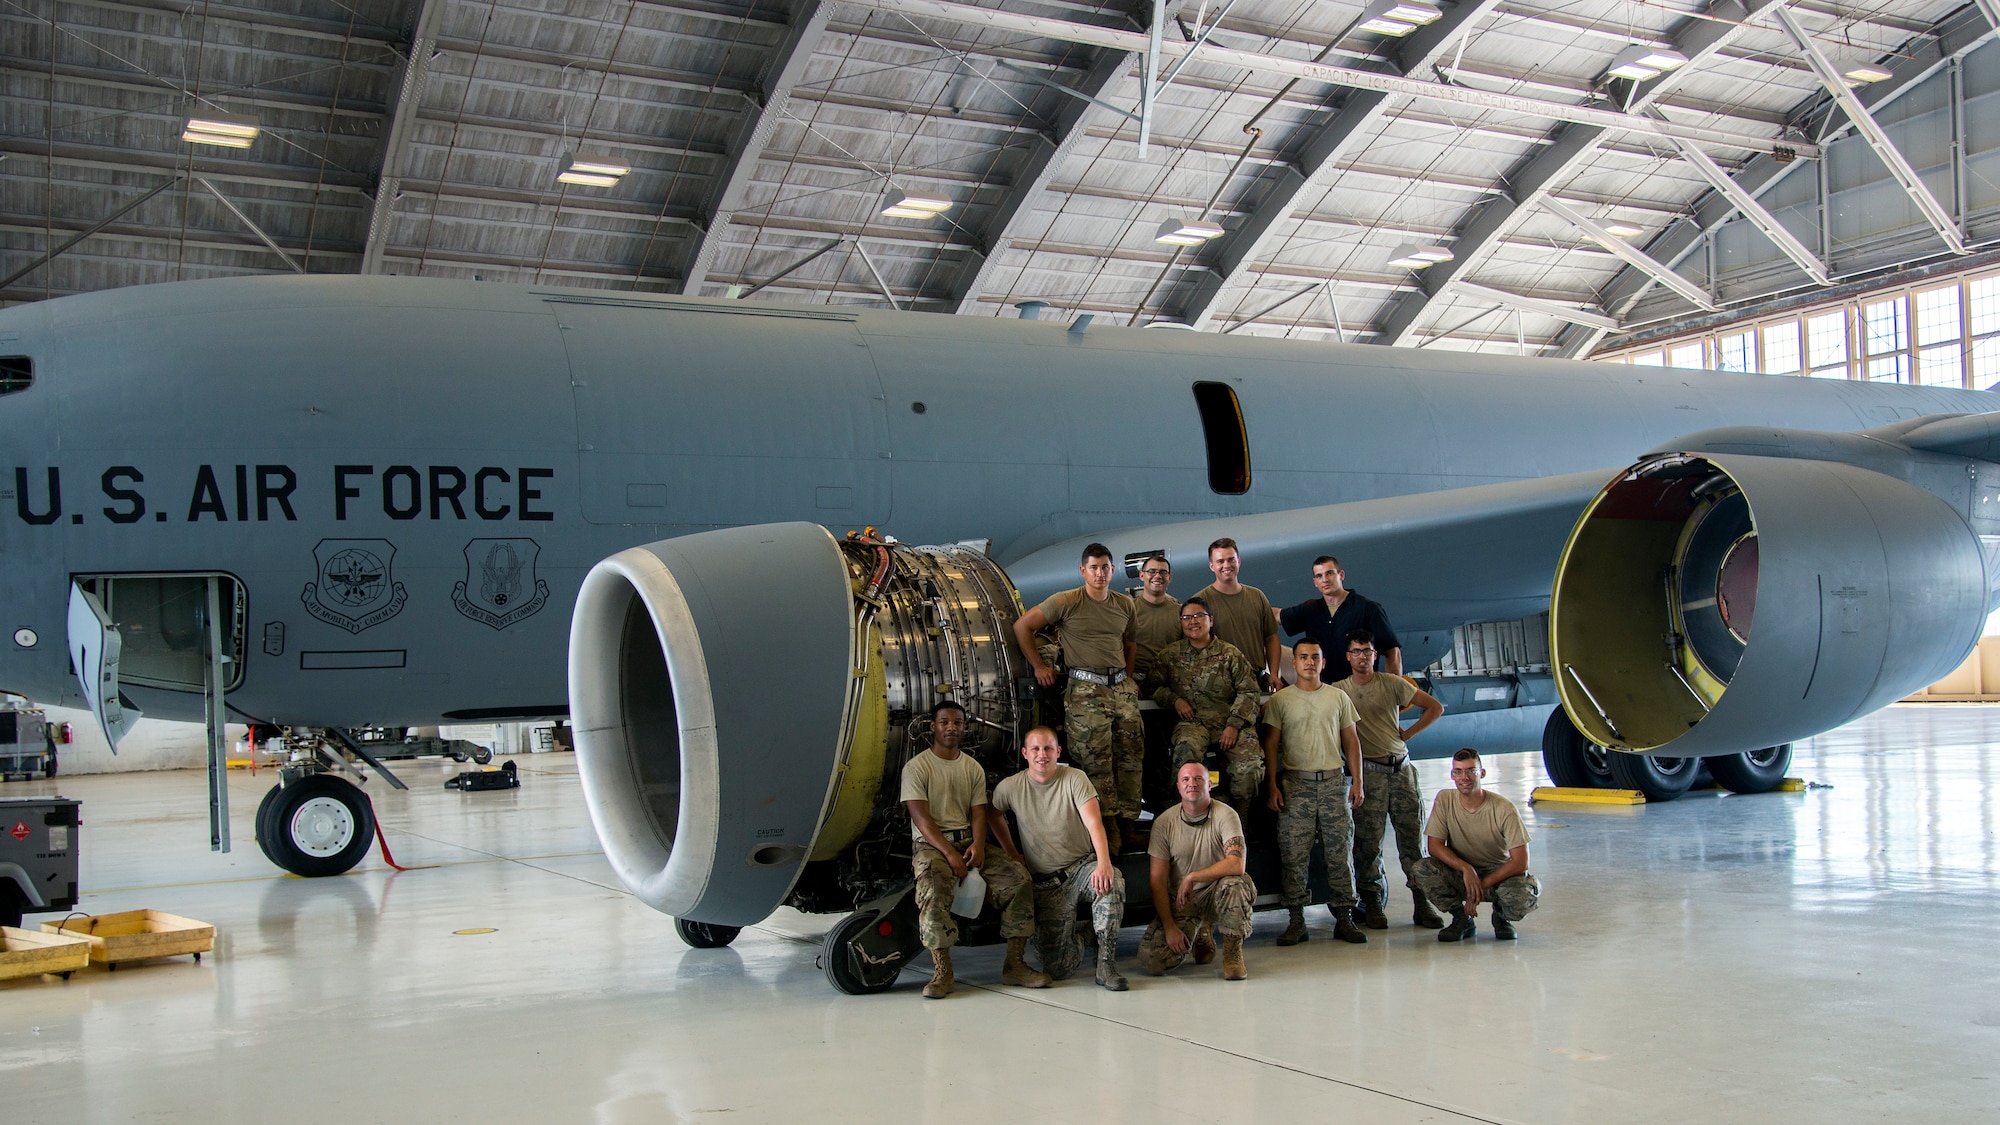 6th Maintenance Group maintainers pause for a photo, July 1, 2019, MacDill Air Force Base, Fla.